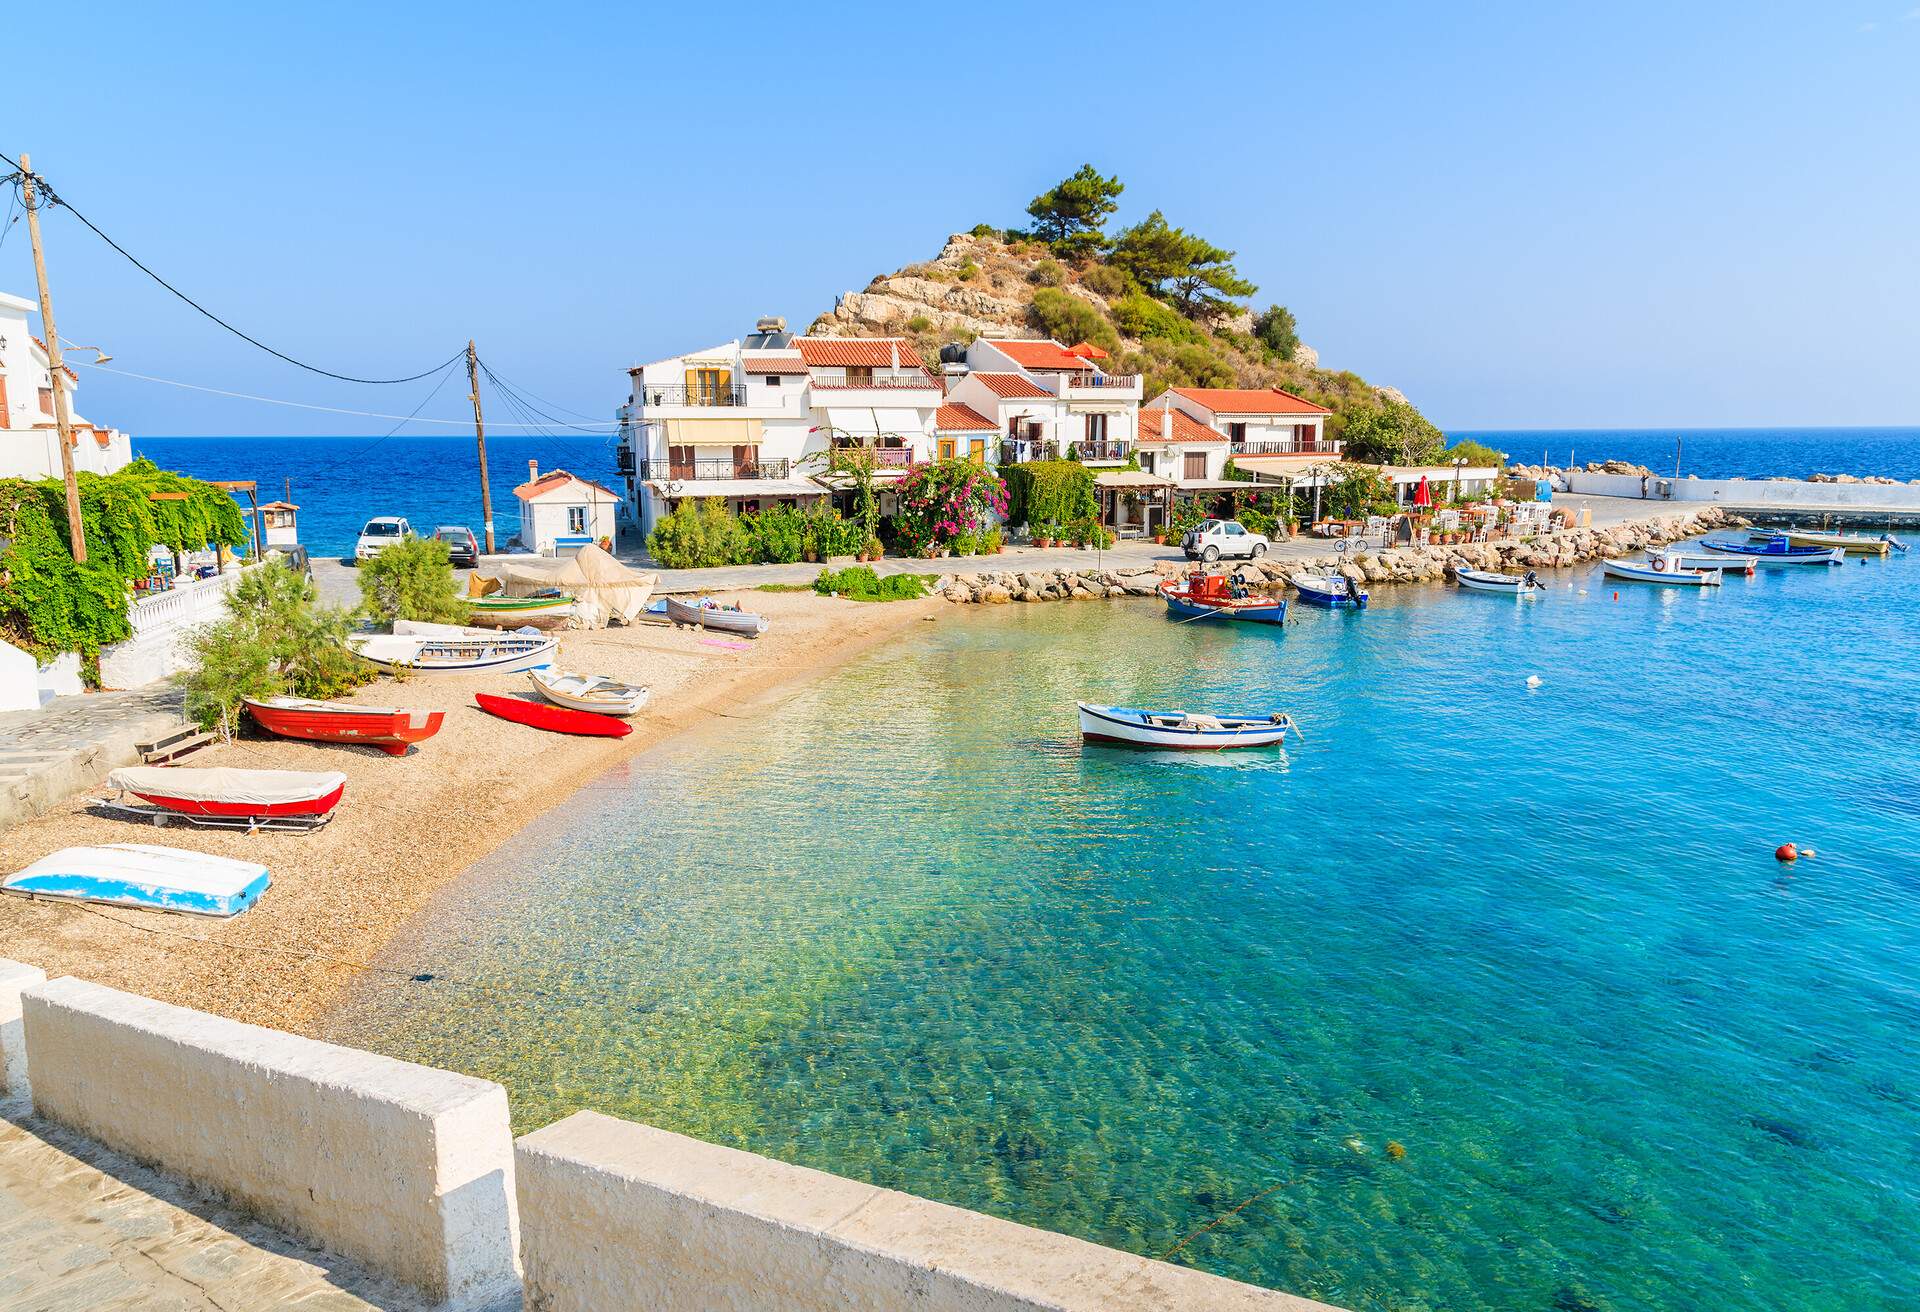 Samos is a Greek island in the eastern Aegean Sea, south of Chios, north of Patmos.